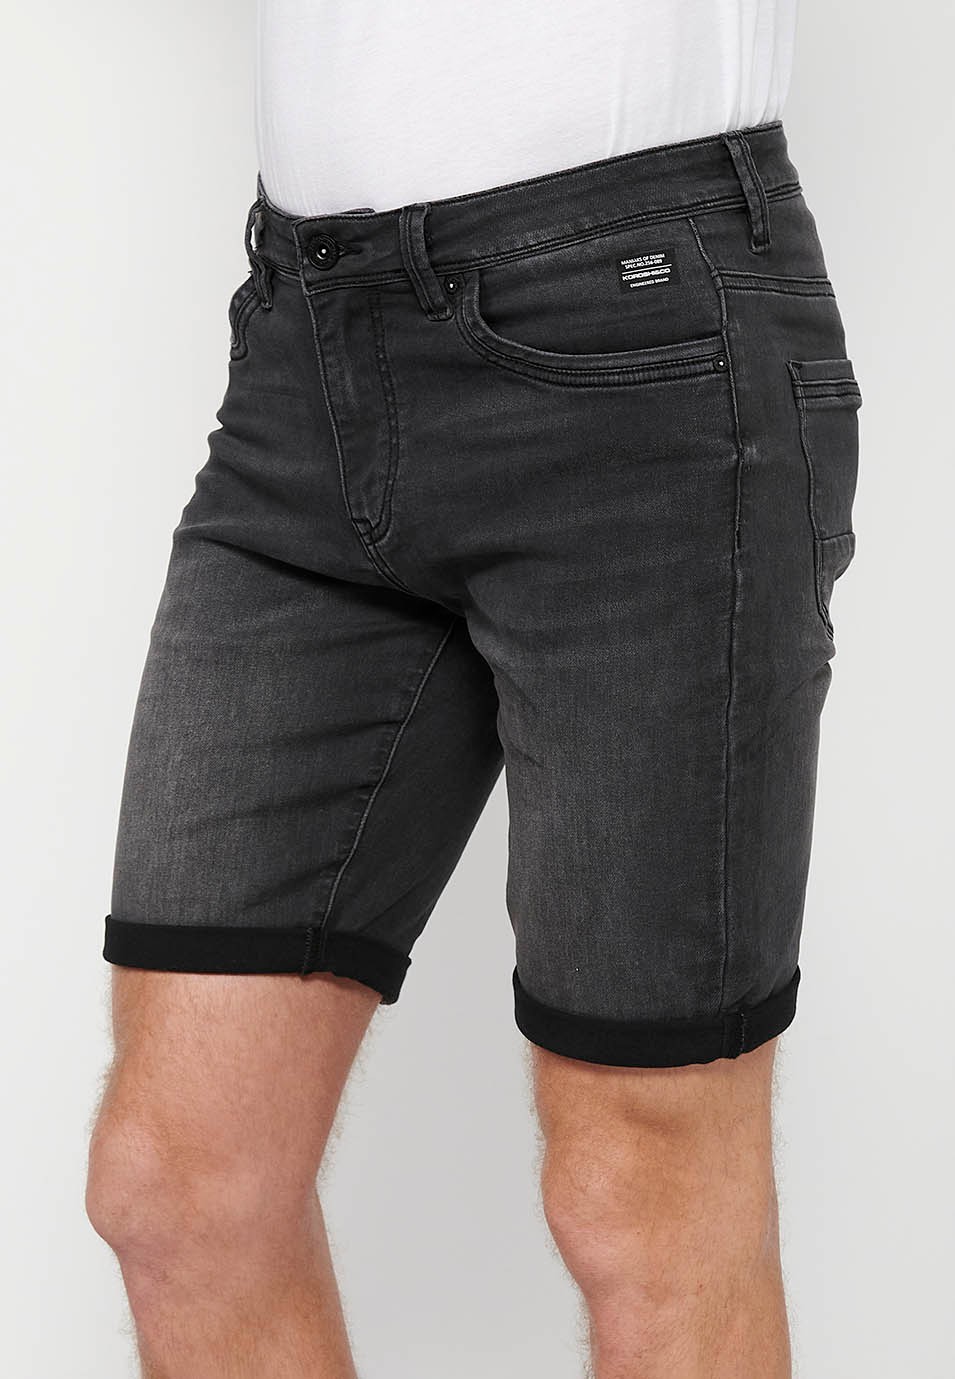 Shorts with turn-up finish with front closure with zipper and button in Black for Men 4